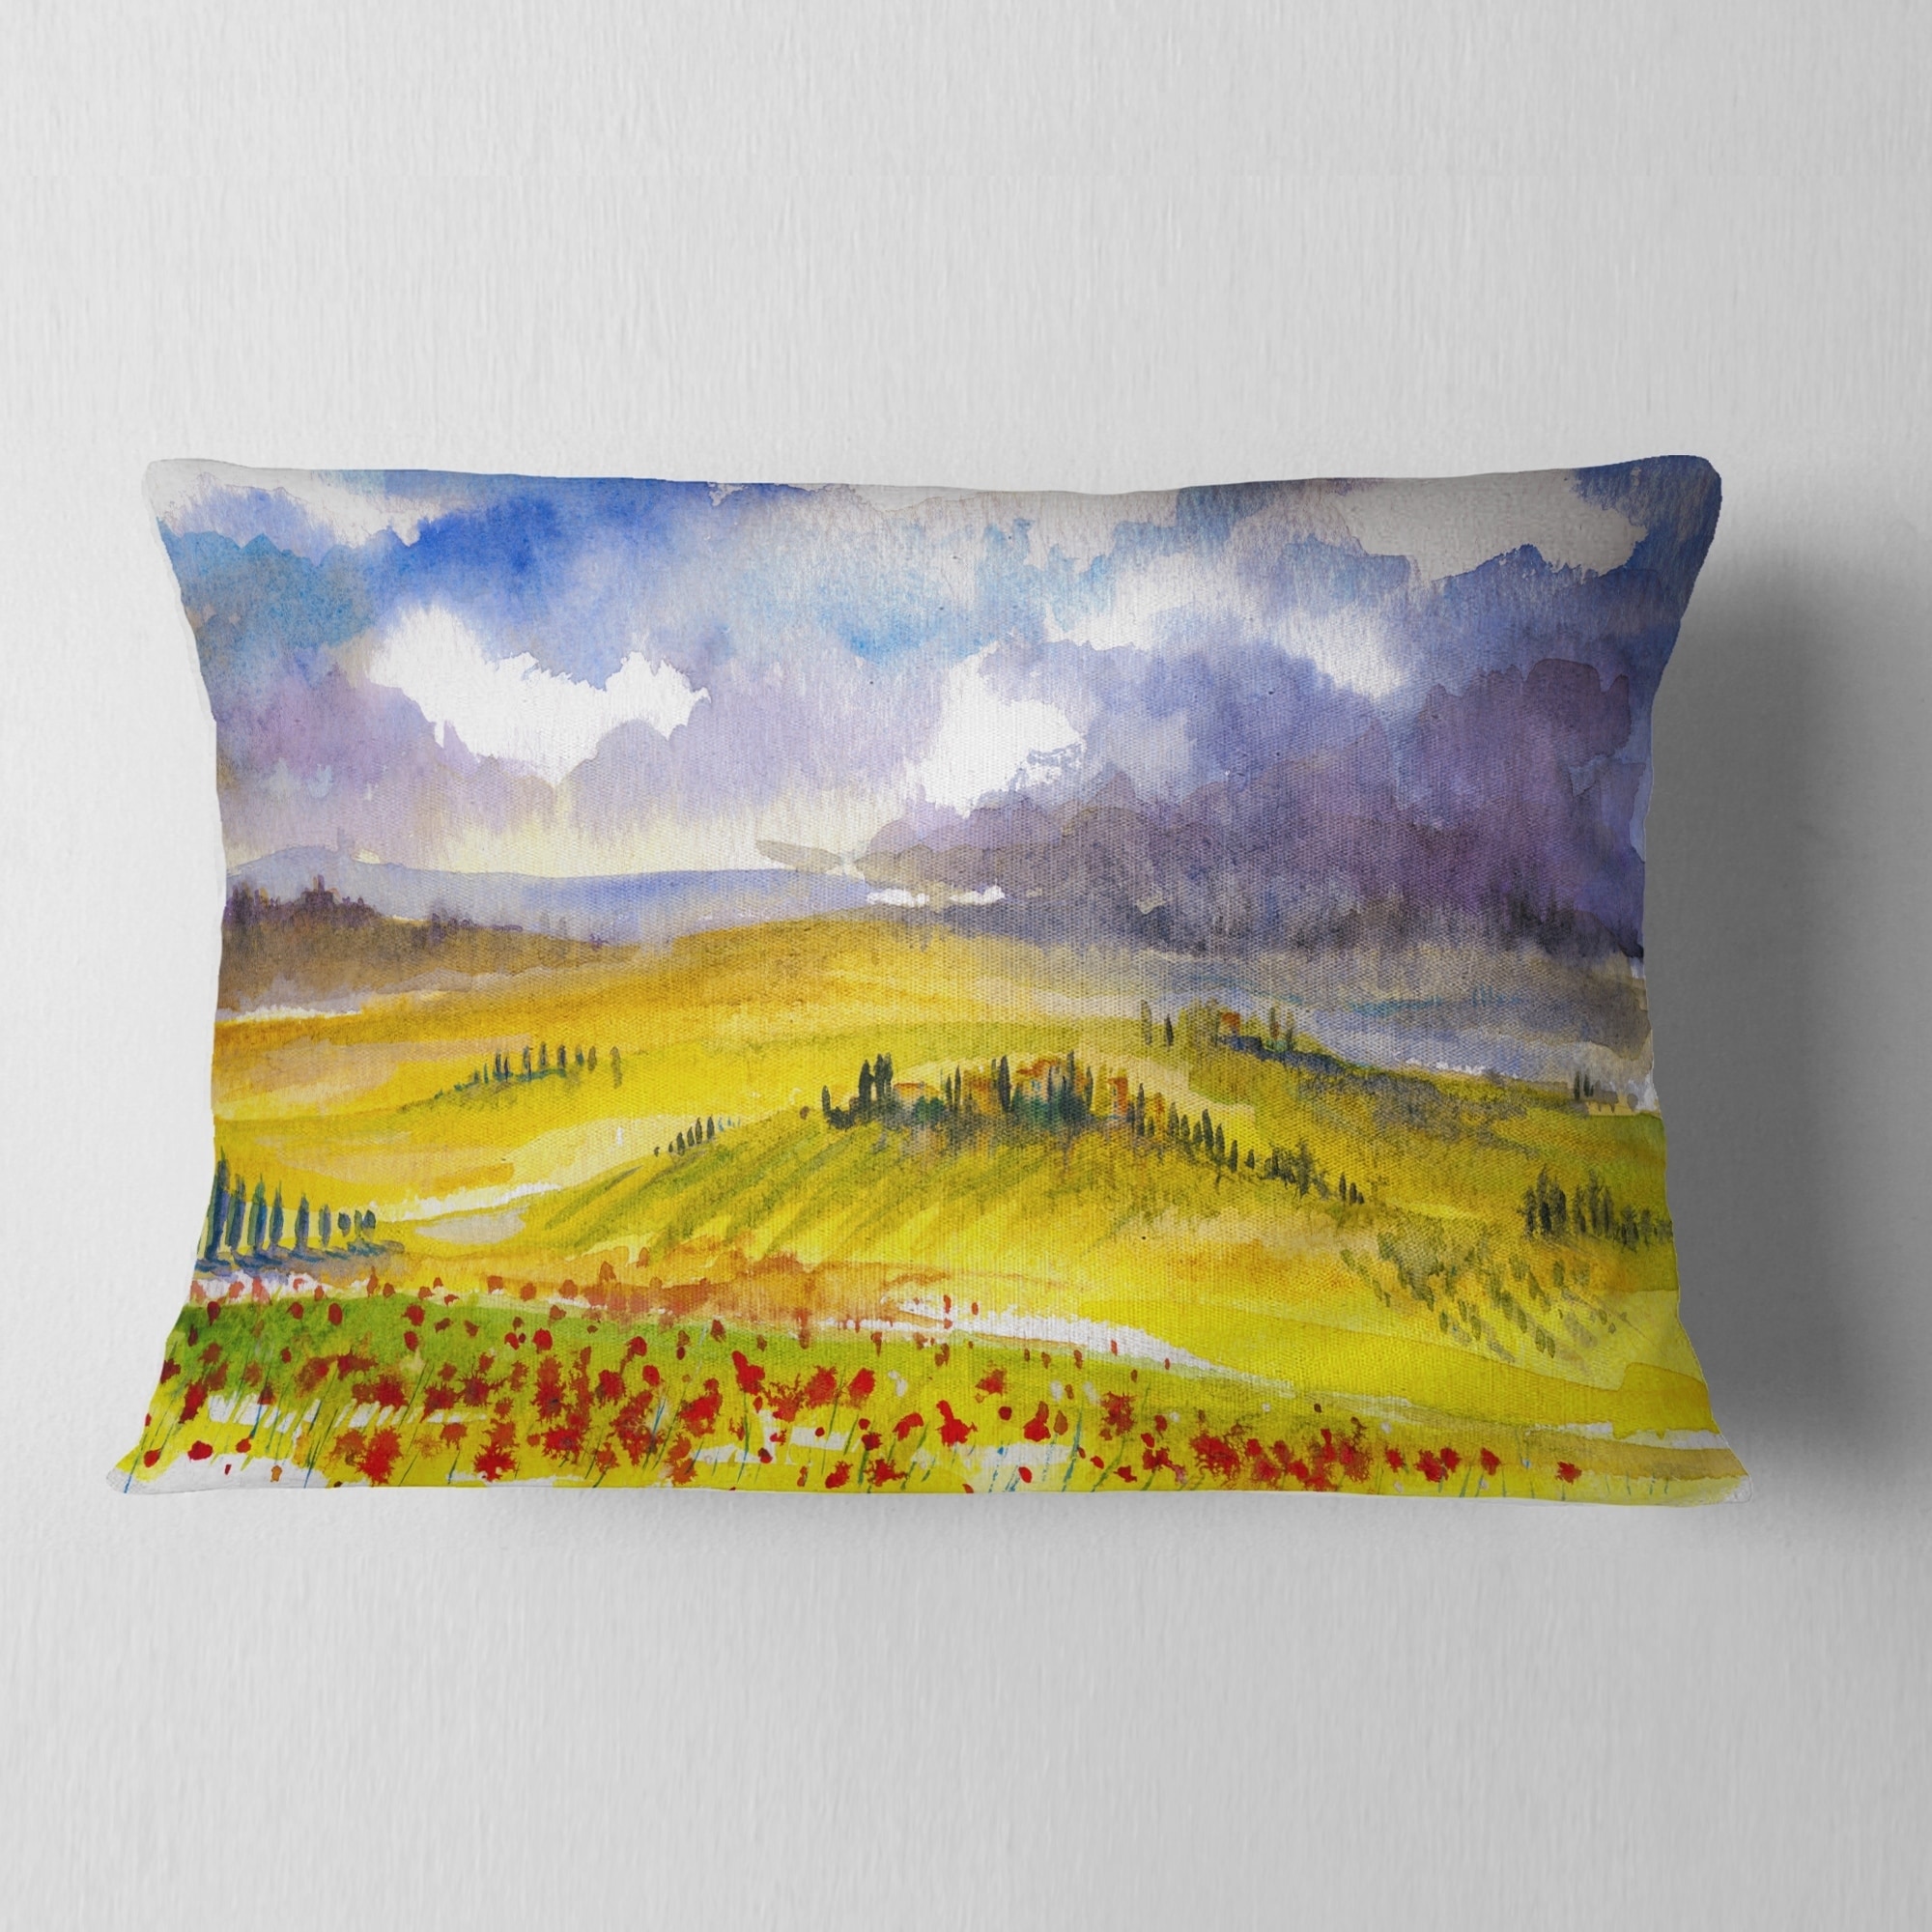 in Designart CU9277-26-26 Beautiful Tuscan Hills Italy Landscape Painting Cushion Cover for Living Room Insert Printed On Both Side x 26 in Sofa Throw Pillow 26 in